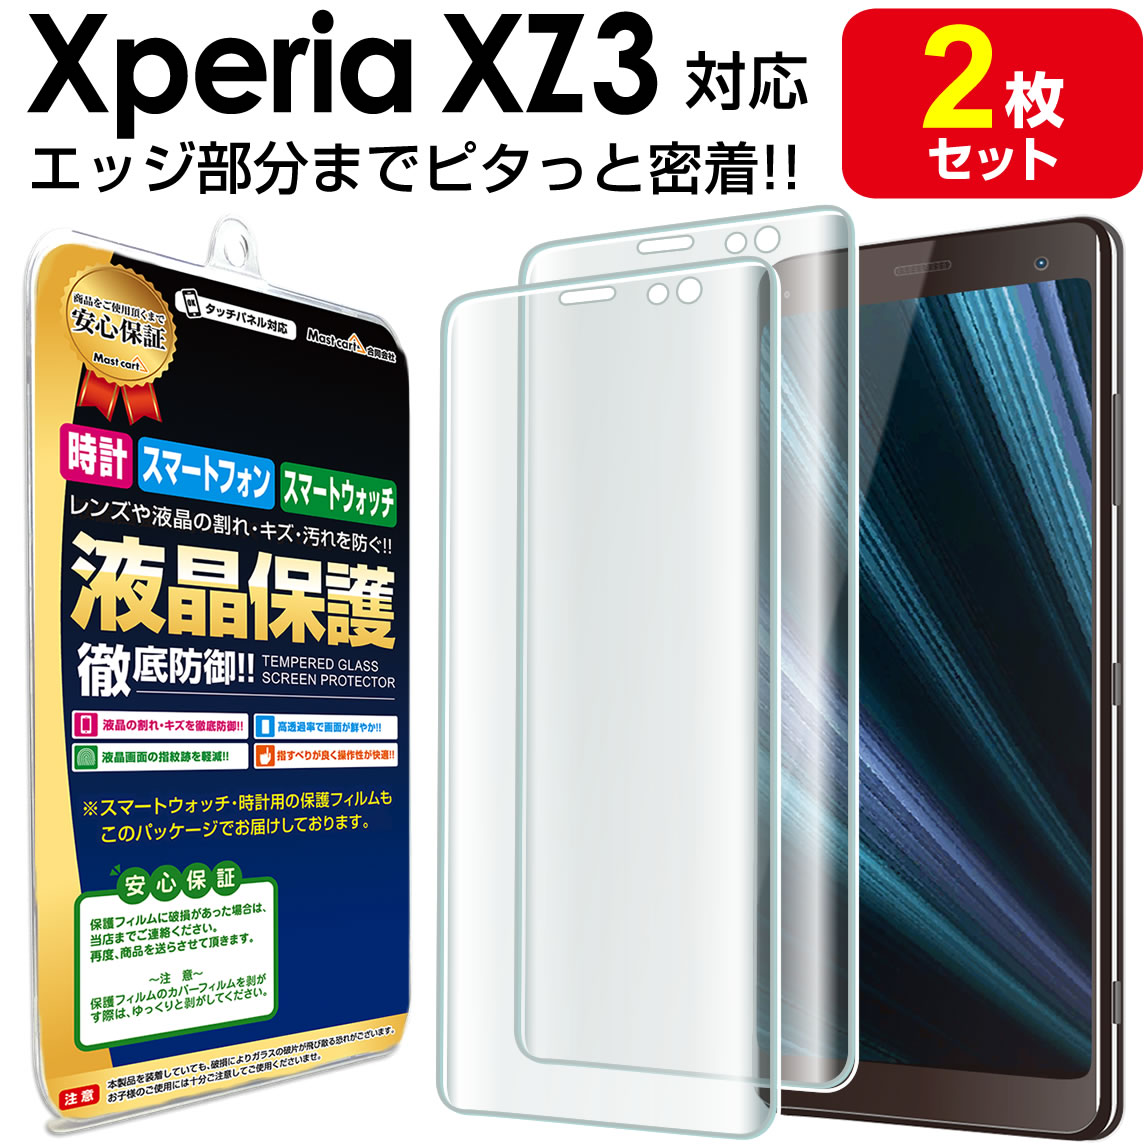 【3Dフルカバー 2枚セット】Xperia XZ3 保護 フィルム XperiaXZ3 SOV39 SO-01L 801SO SONY エクスペリア x<strong>z3</strong> TPU 液晶 保護 フィルム アクセサリー 画面 液晶 送料無料 シート 透明 画面 カバー